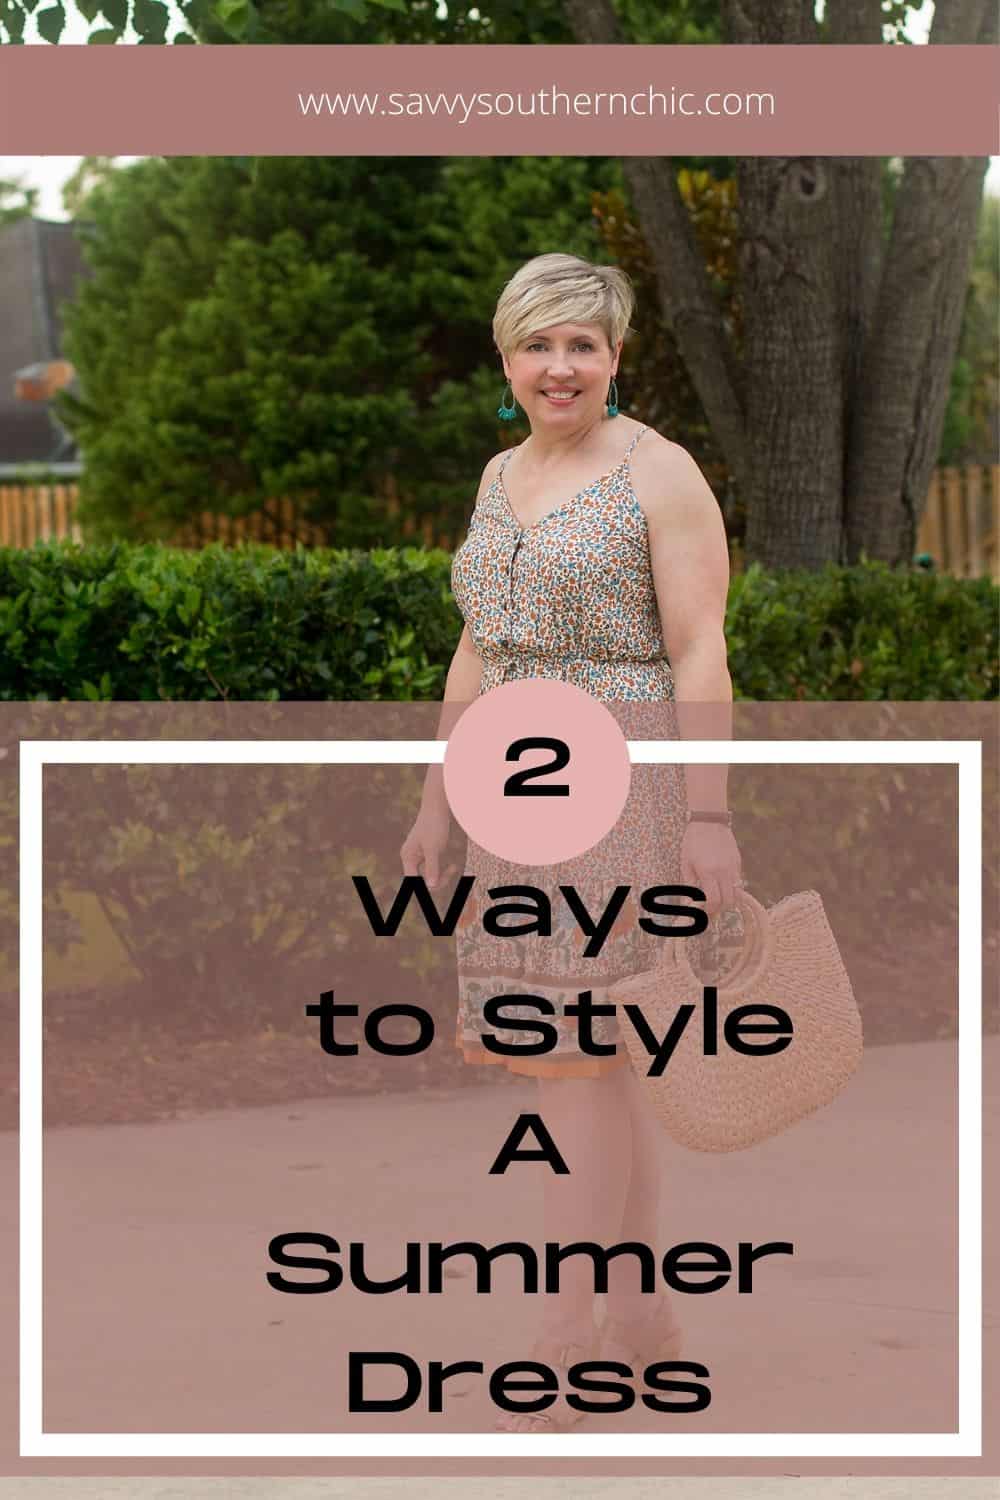  2 ways to style a summer dress